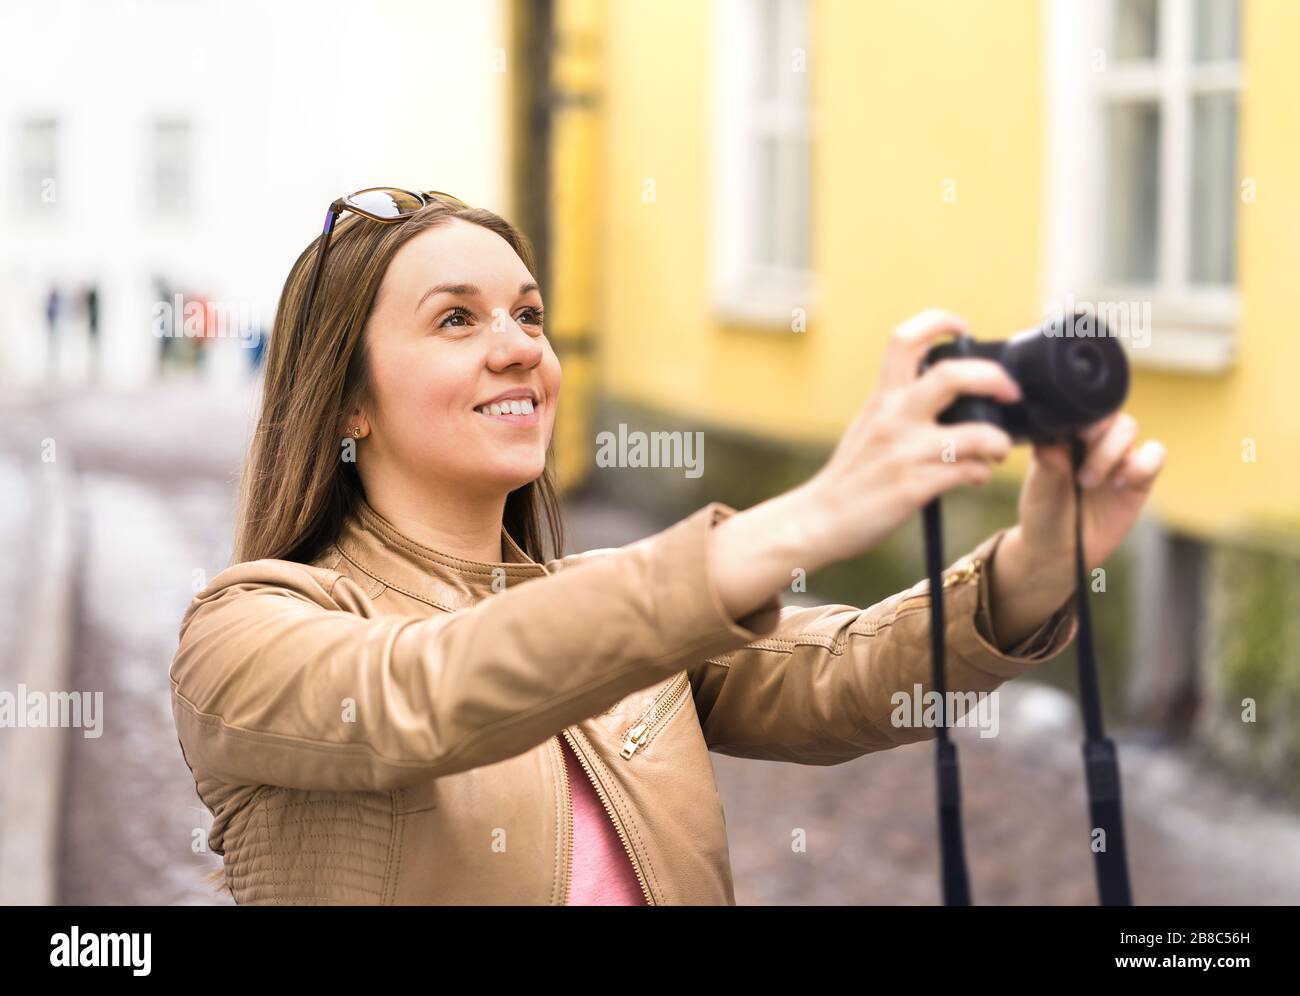 Happy woman taking photo with camera. Tourist on vacation in city street. Holiday pictures. Smiling photographer or hobbyist. Stock Photo